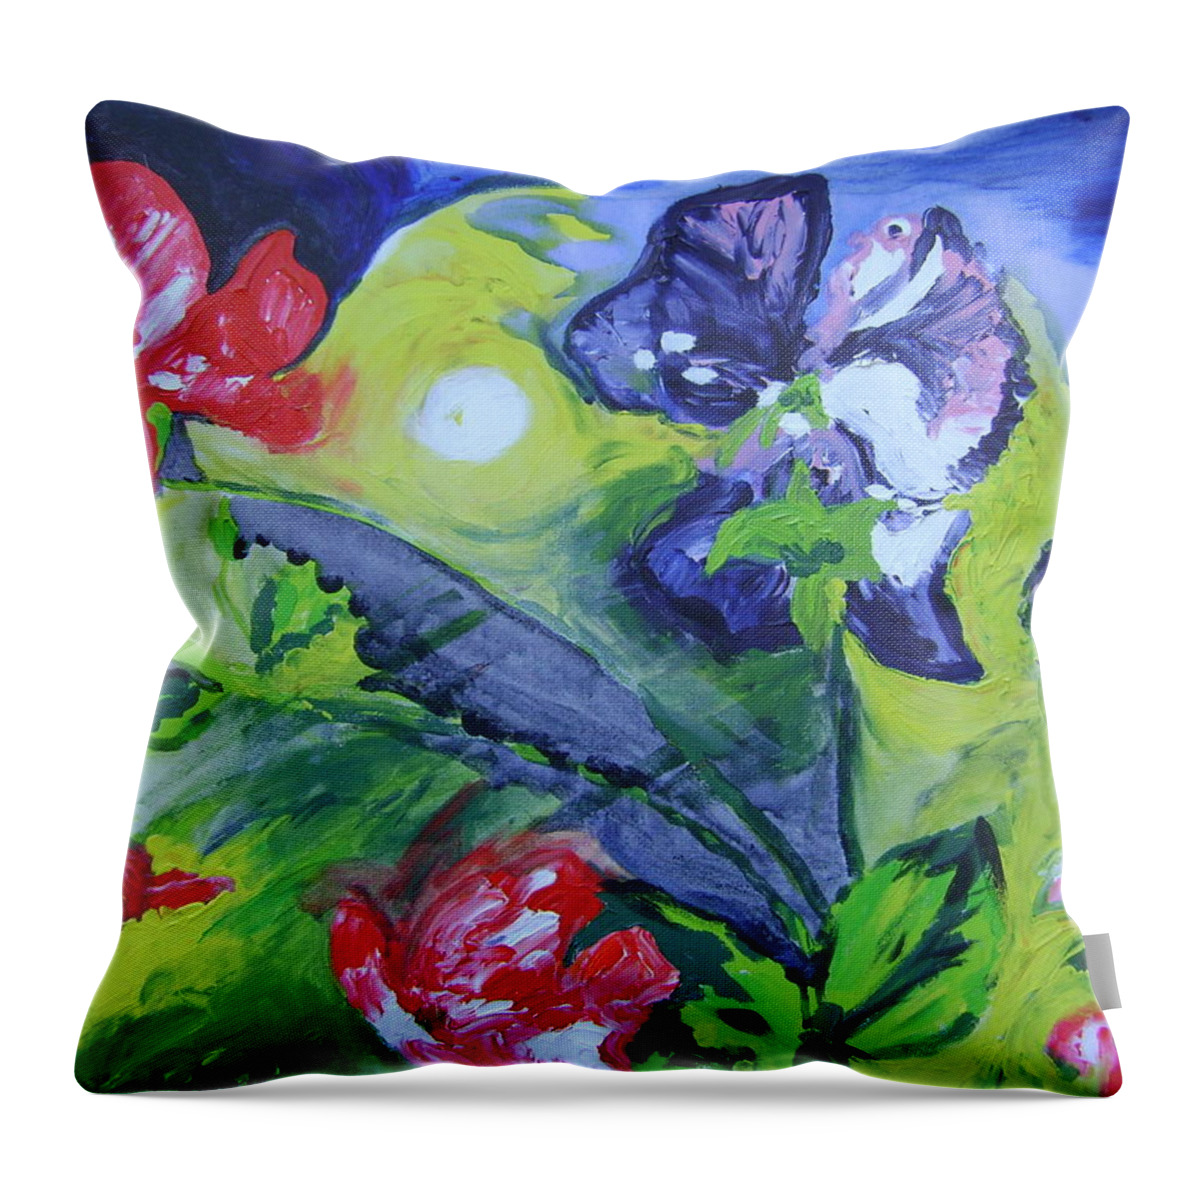 Sweet Peas Throw Pillow featuring the painting Sweet Peas by Therese Legere